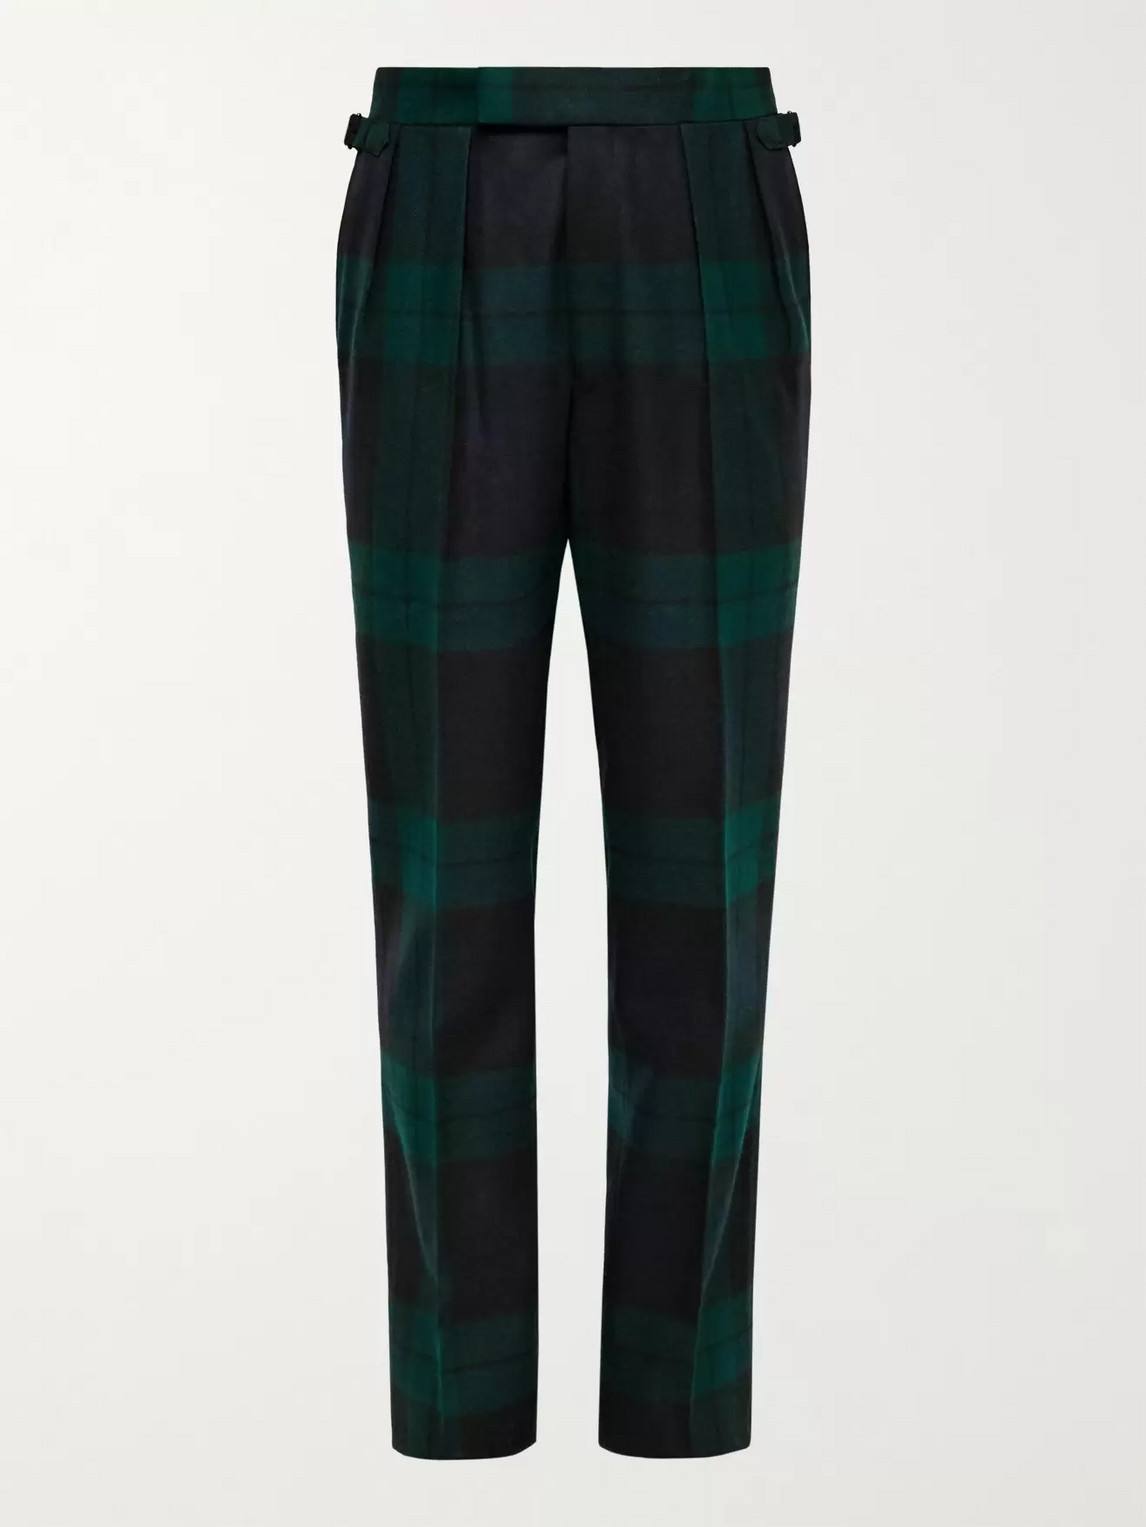 Aimé Leon Dore Martin Greenfield Slim-fit Pleated Checked Wool Suit Trousers